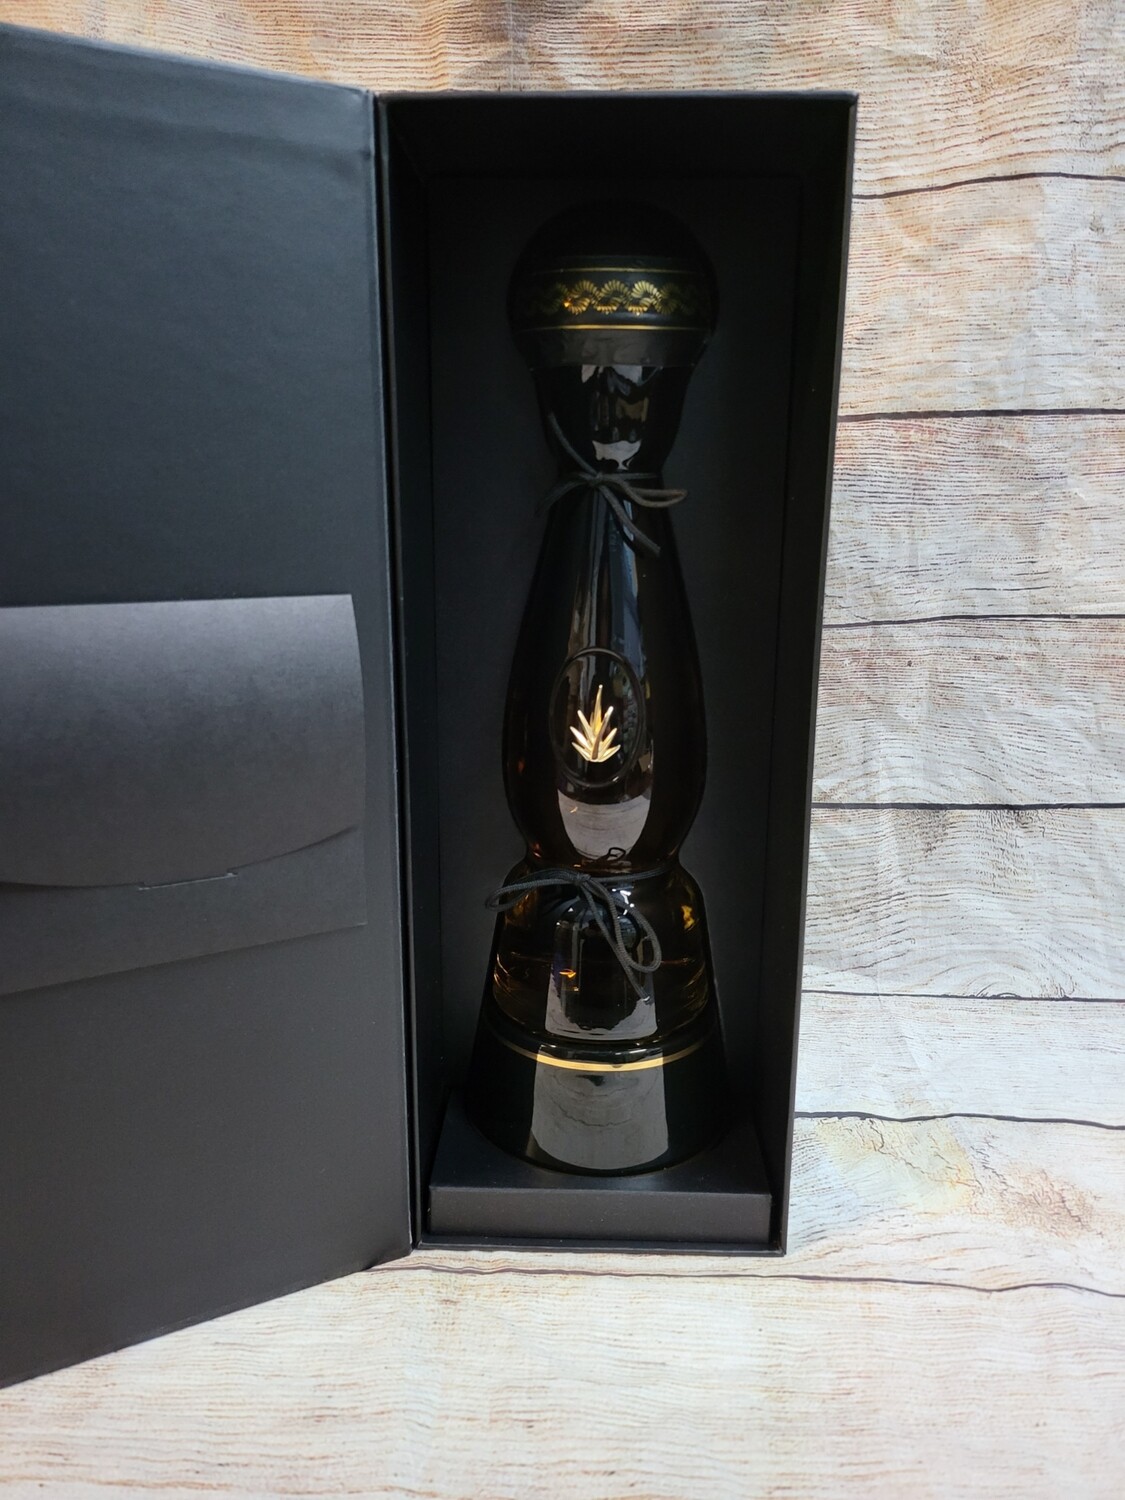 Clase Azul Gold Tequila 750ml